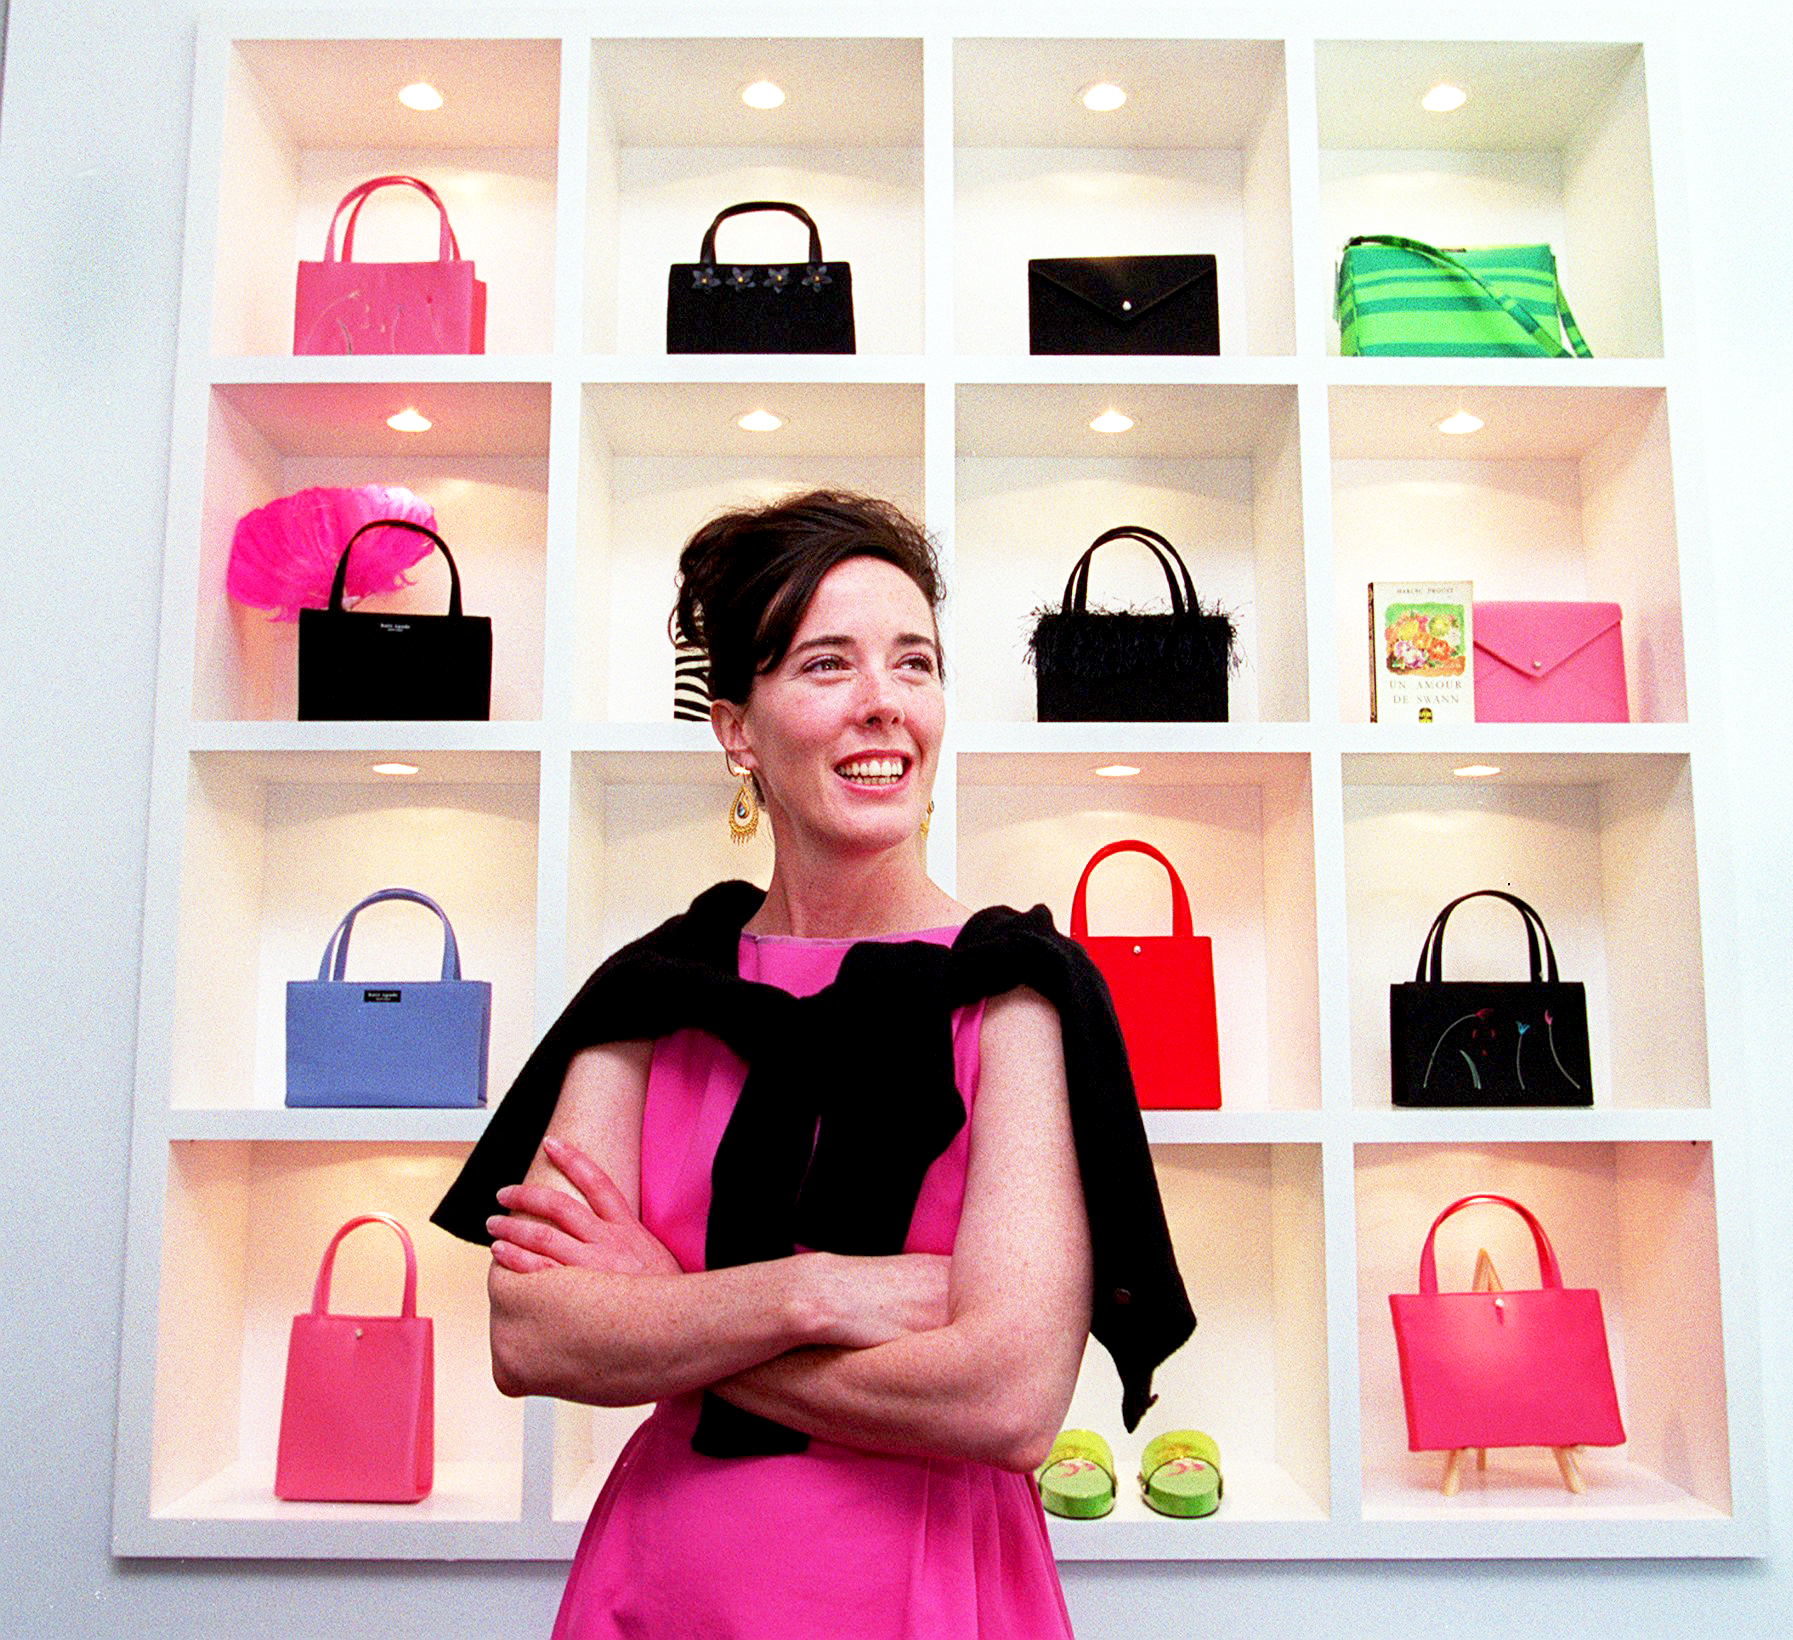 Us' Editors Share Favorite Kate Spade Items Following Her Death